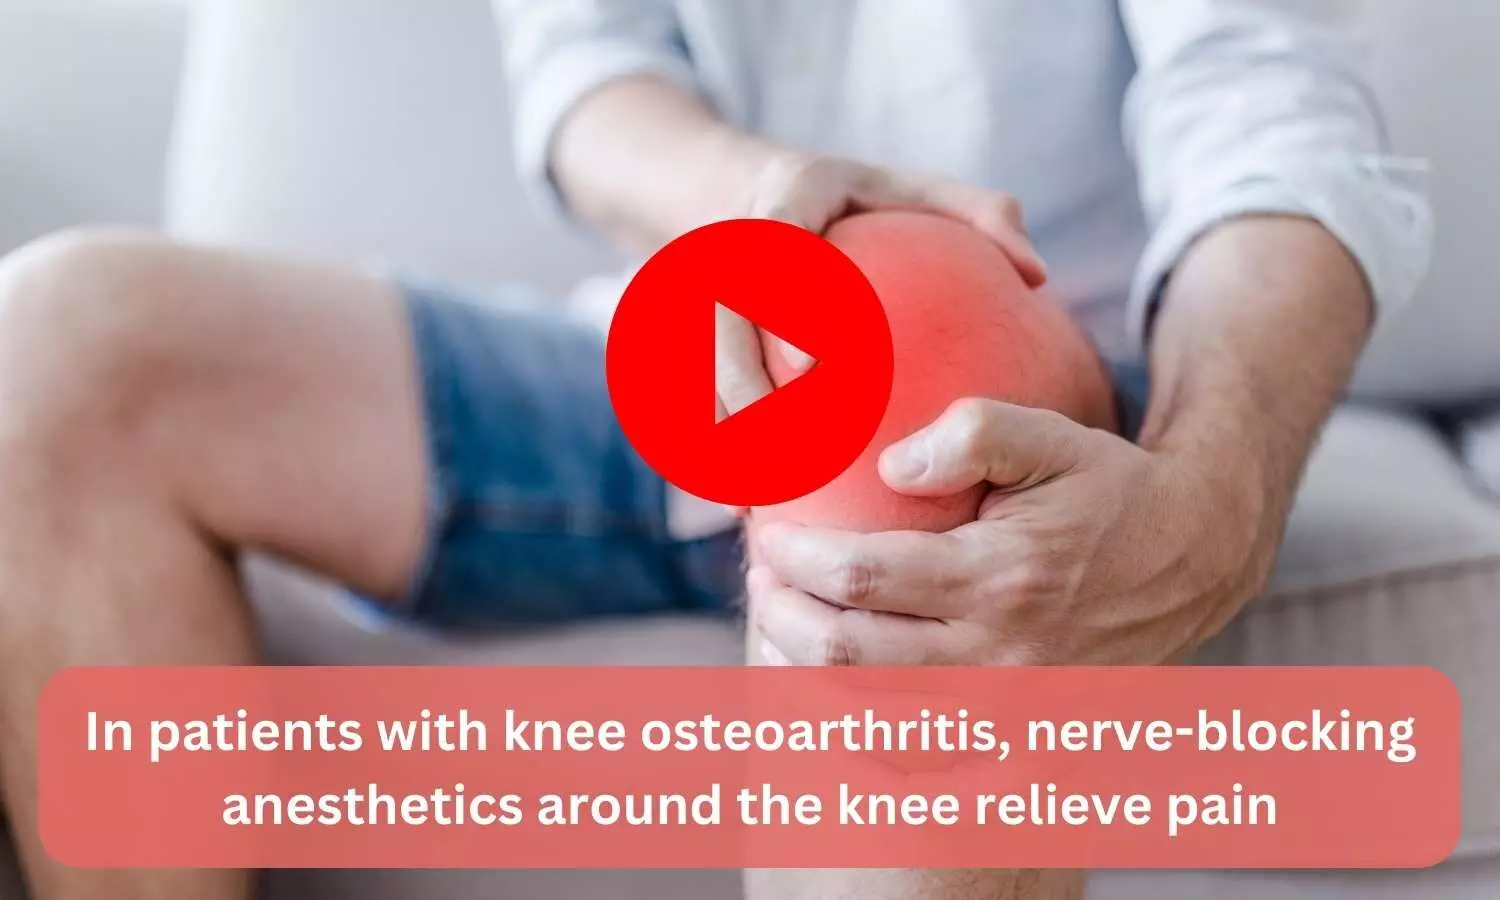 In patients with knee osteoarthritis, nerve-blocking anesthetics around the knee relieve pain